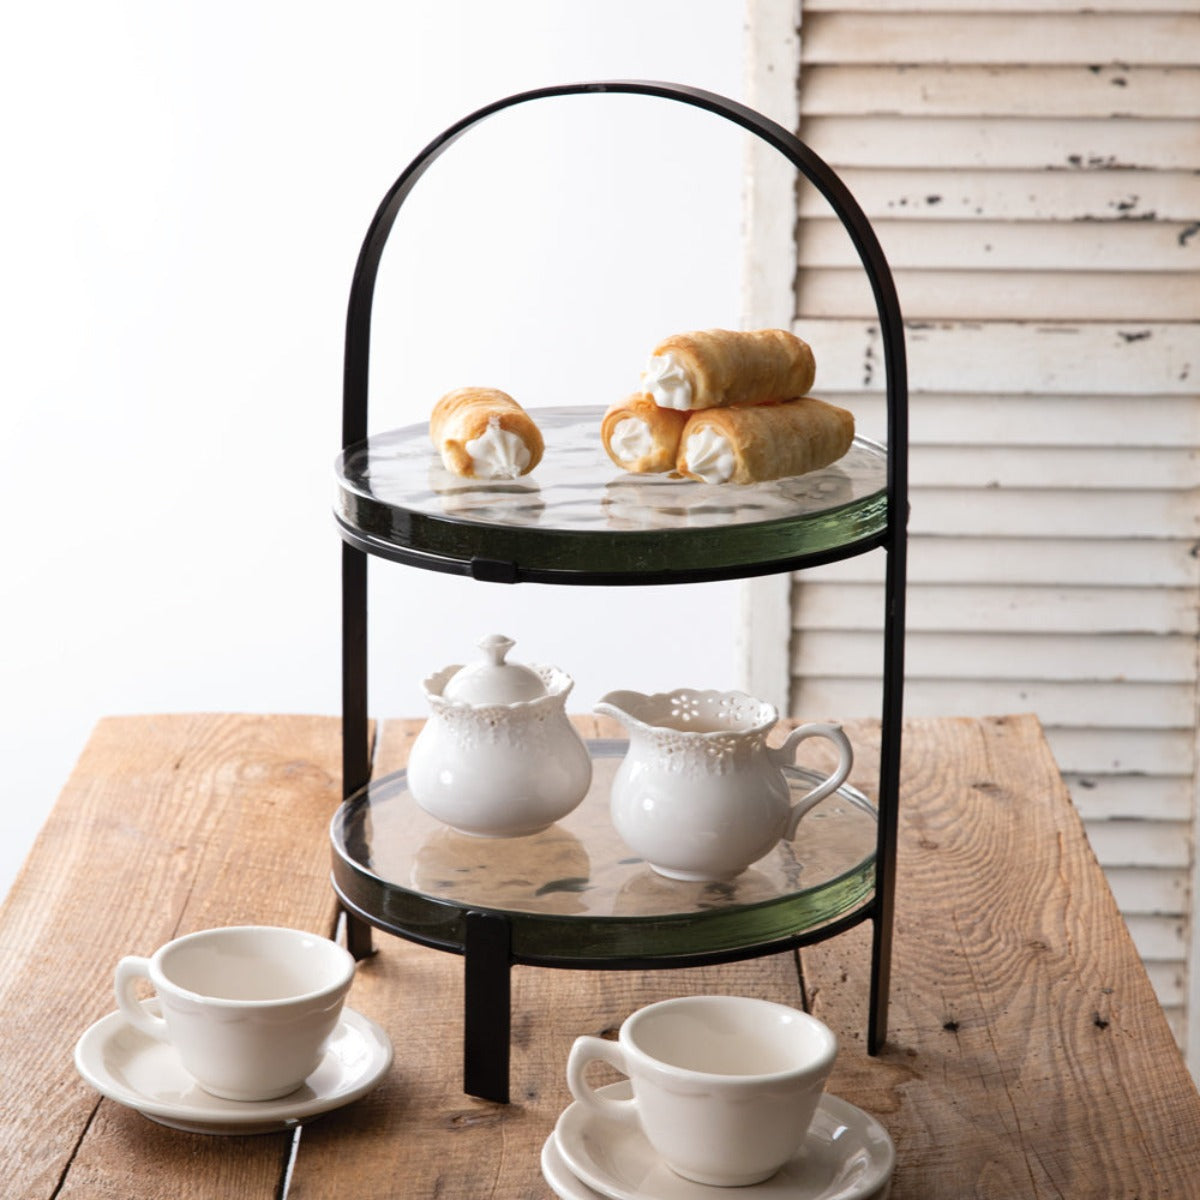 New Iron Plate Support Tea Cake Rack Pictures Stand Decorative